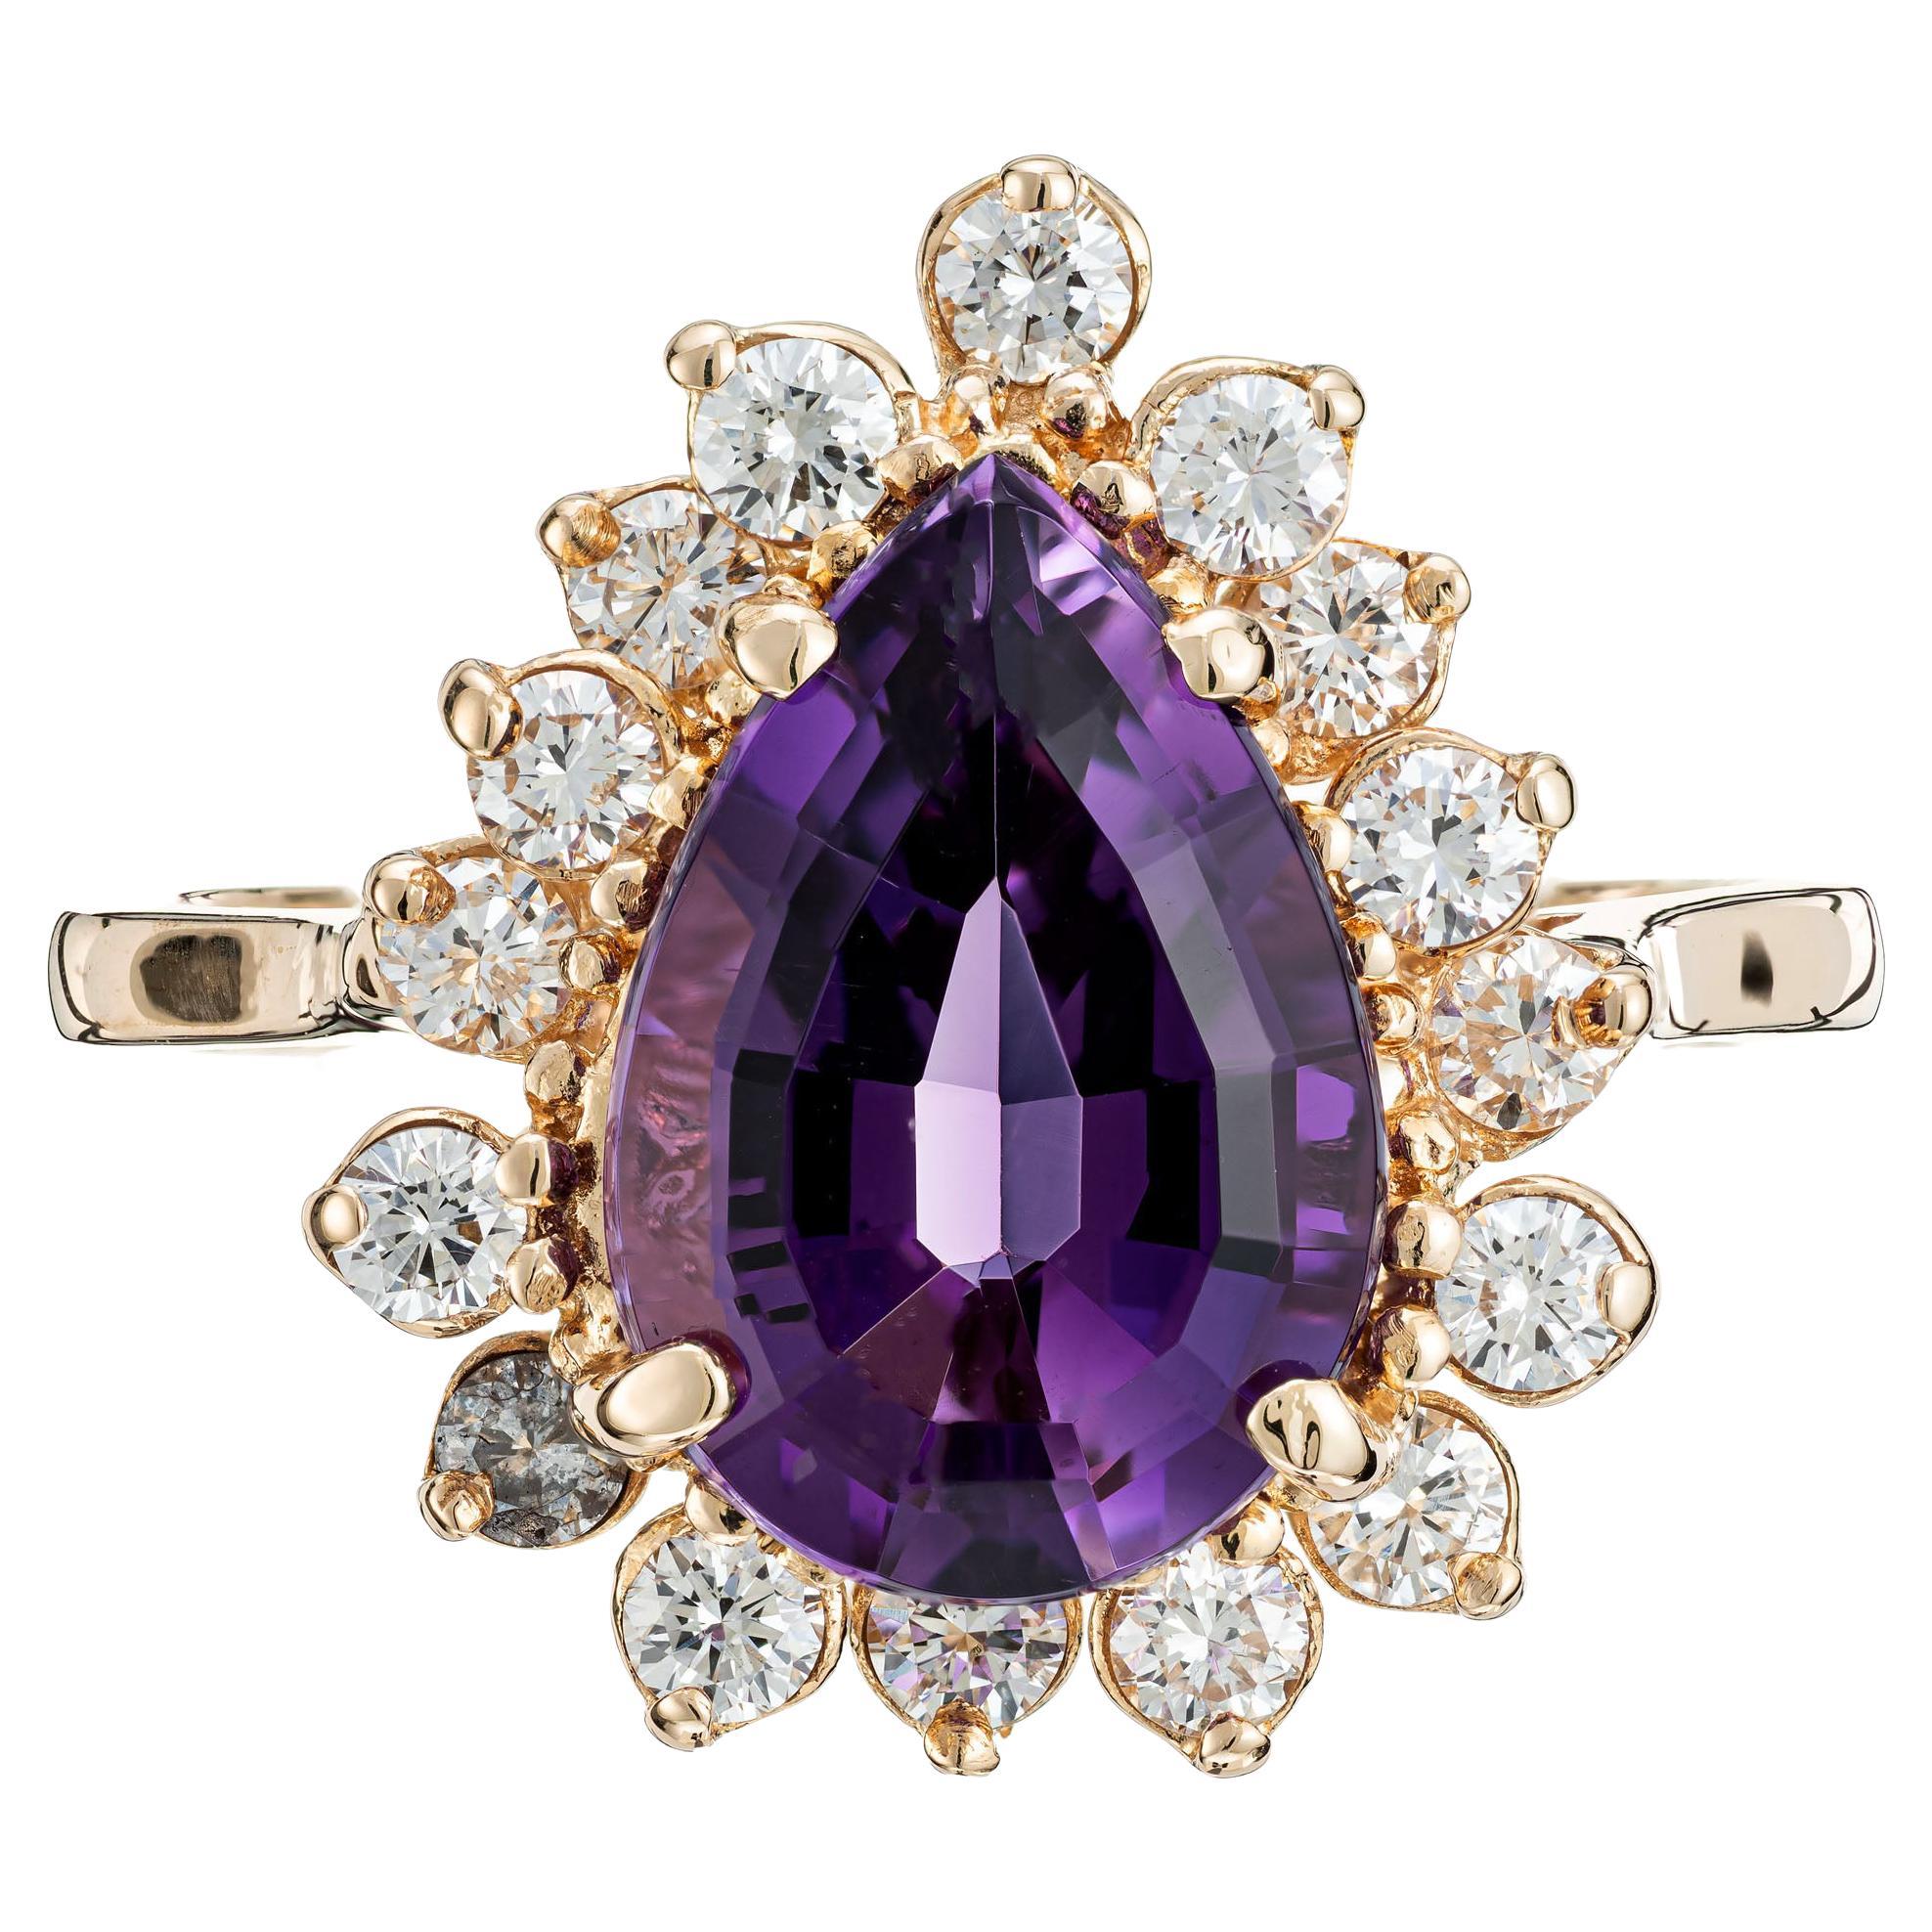 2.65 Carat Pear Shaped Natural Amethyst Diamond Halo Gold Ring For Sale